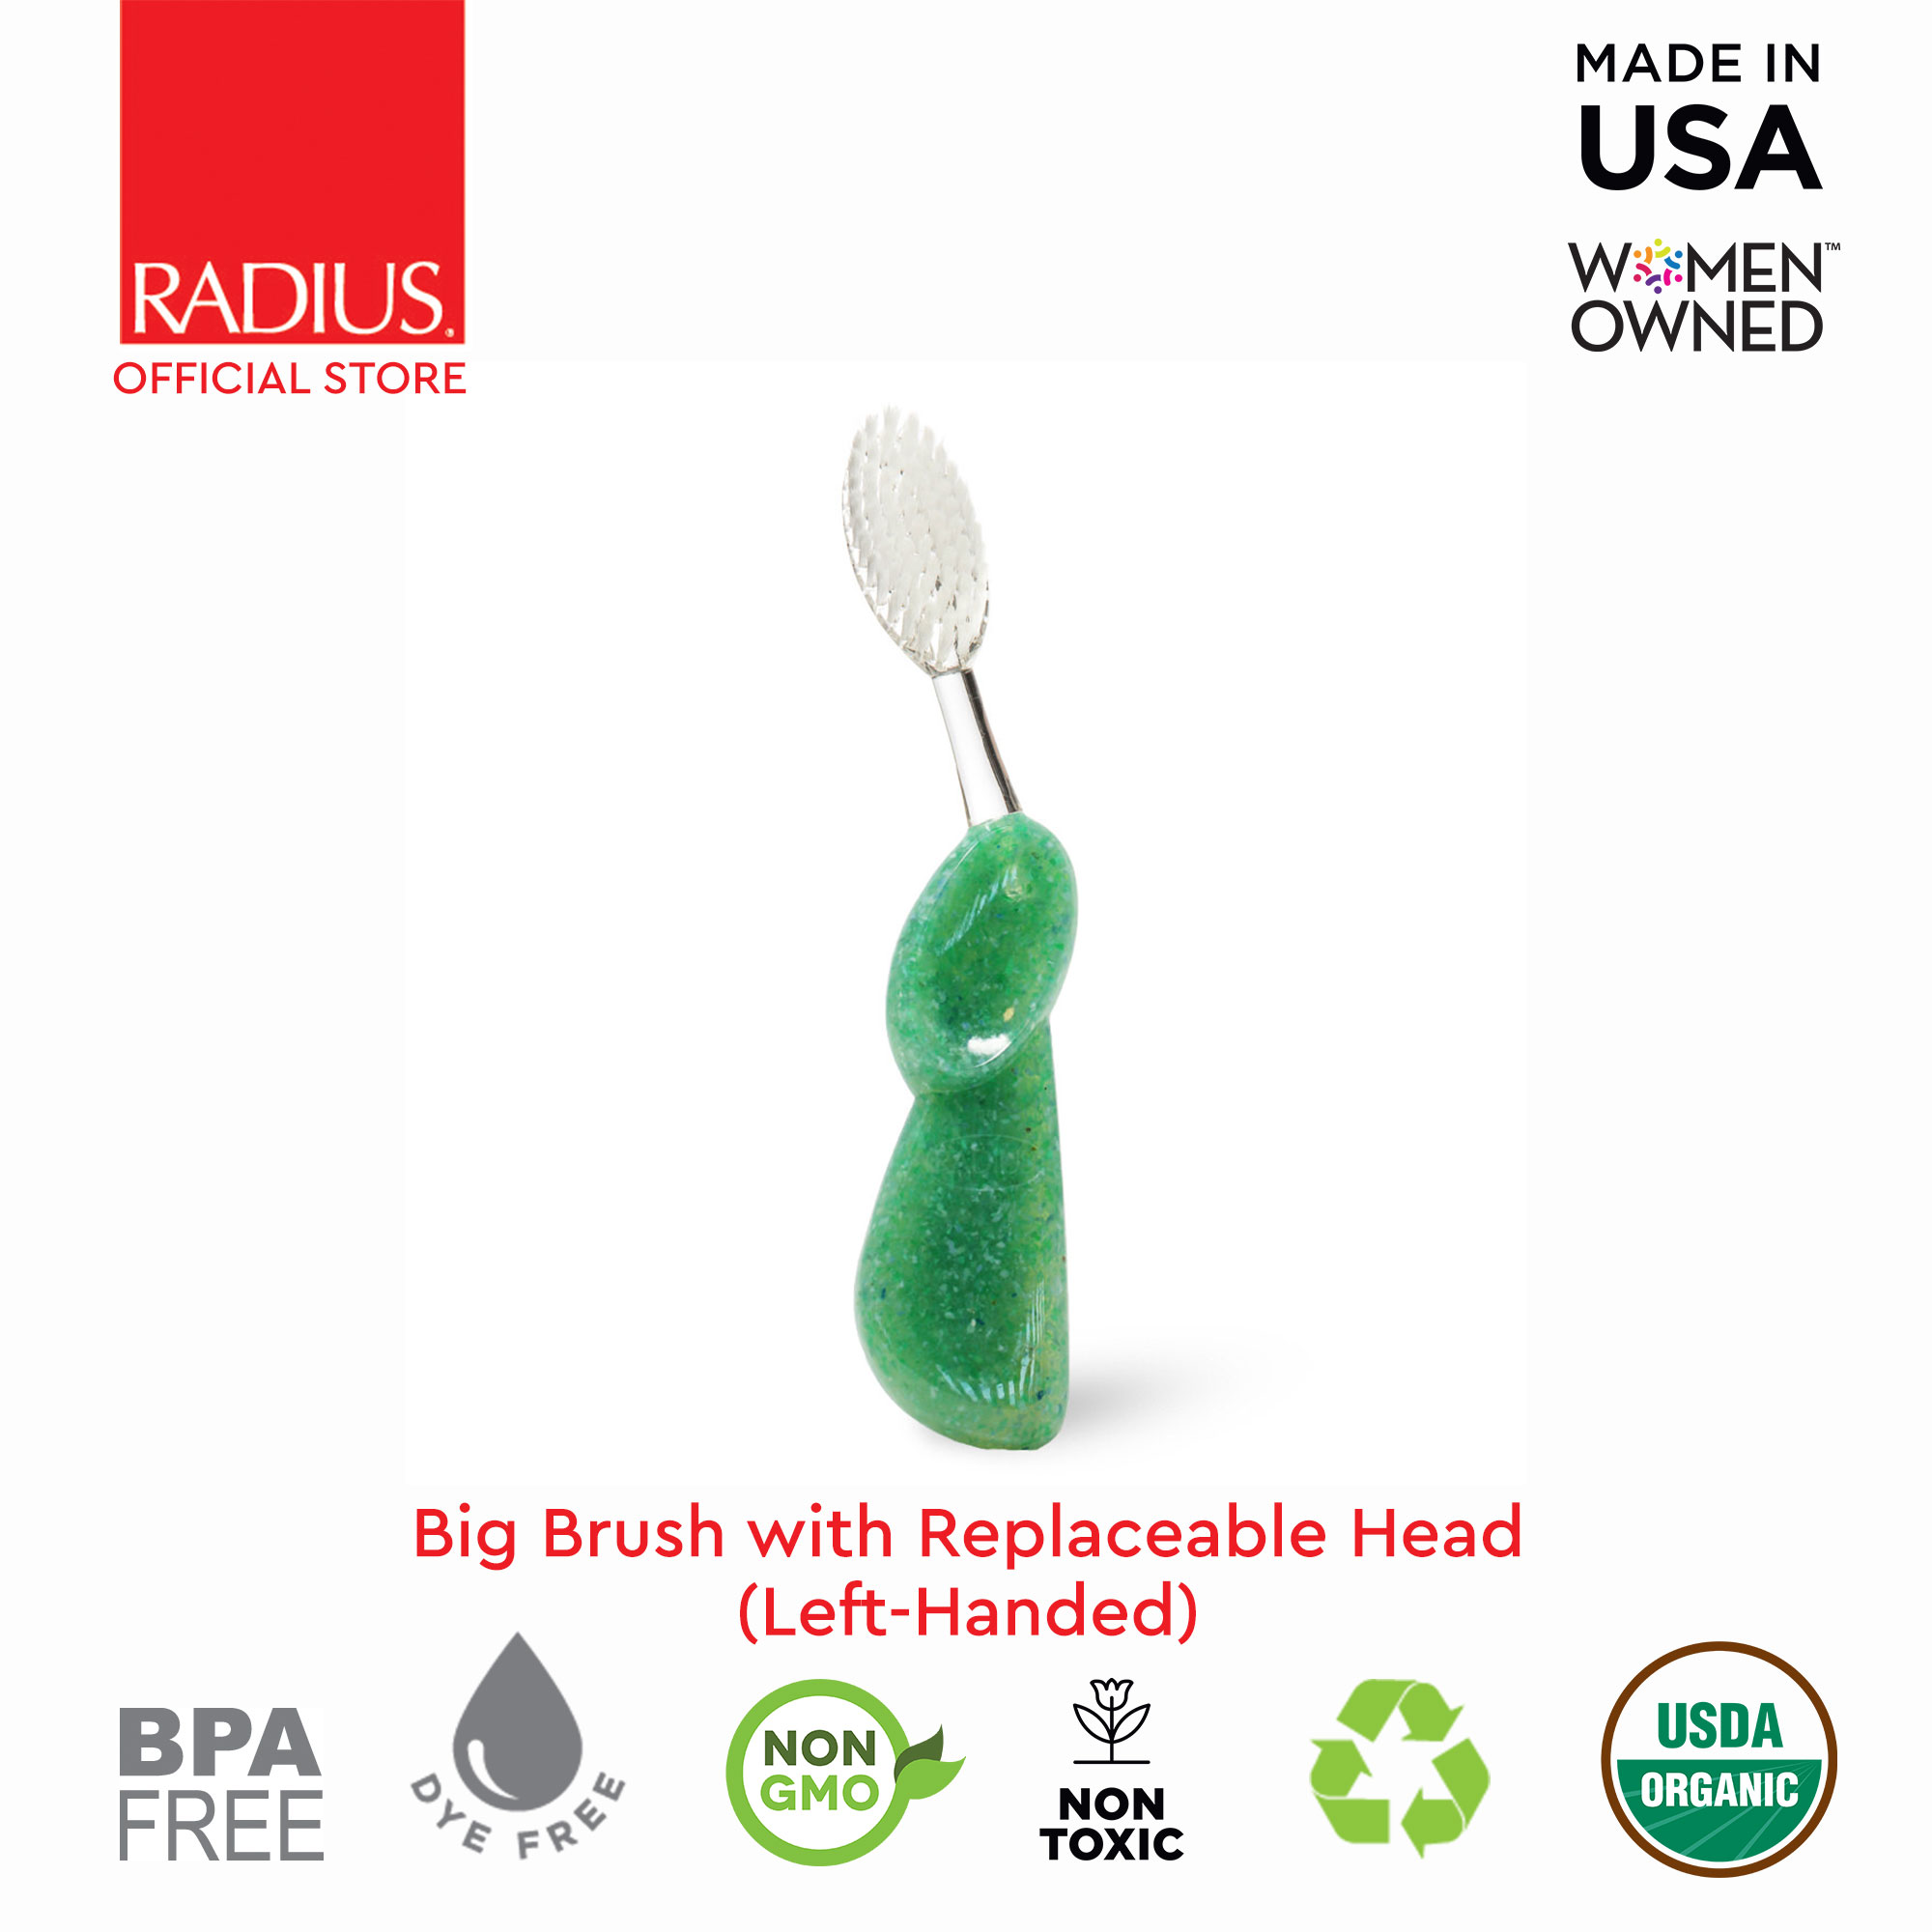 Big Brush with Replaceable Head